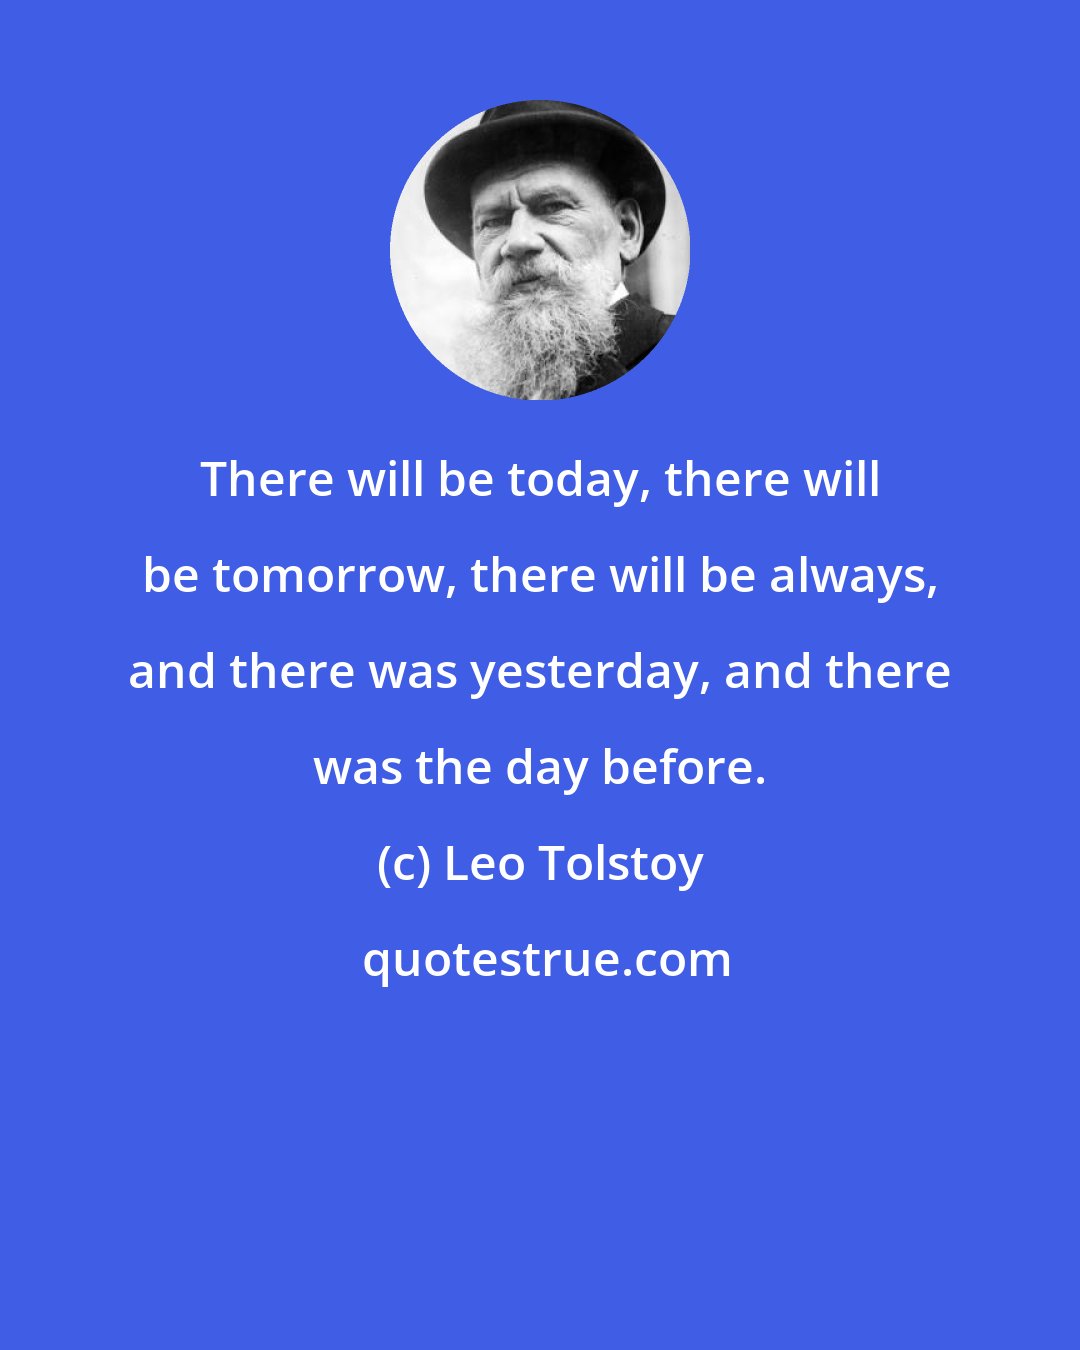 Leo Tolstoy: There will be today, there will be tomorrow, there will be always, and there was yesterday, and there was the day before.